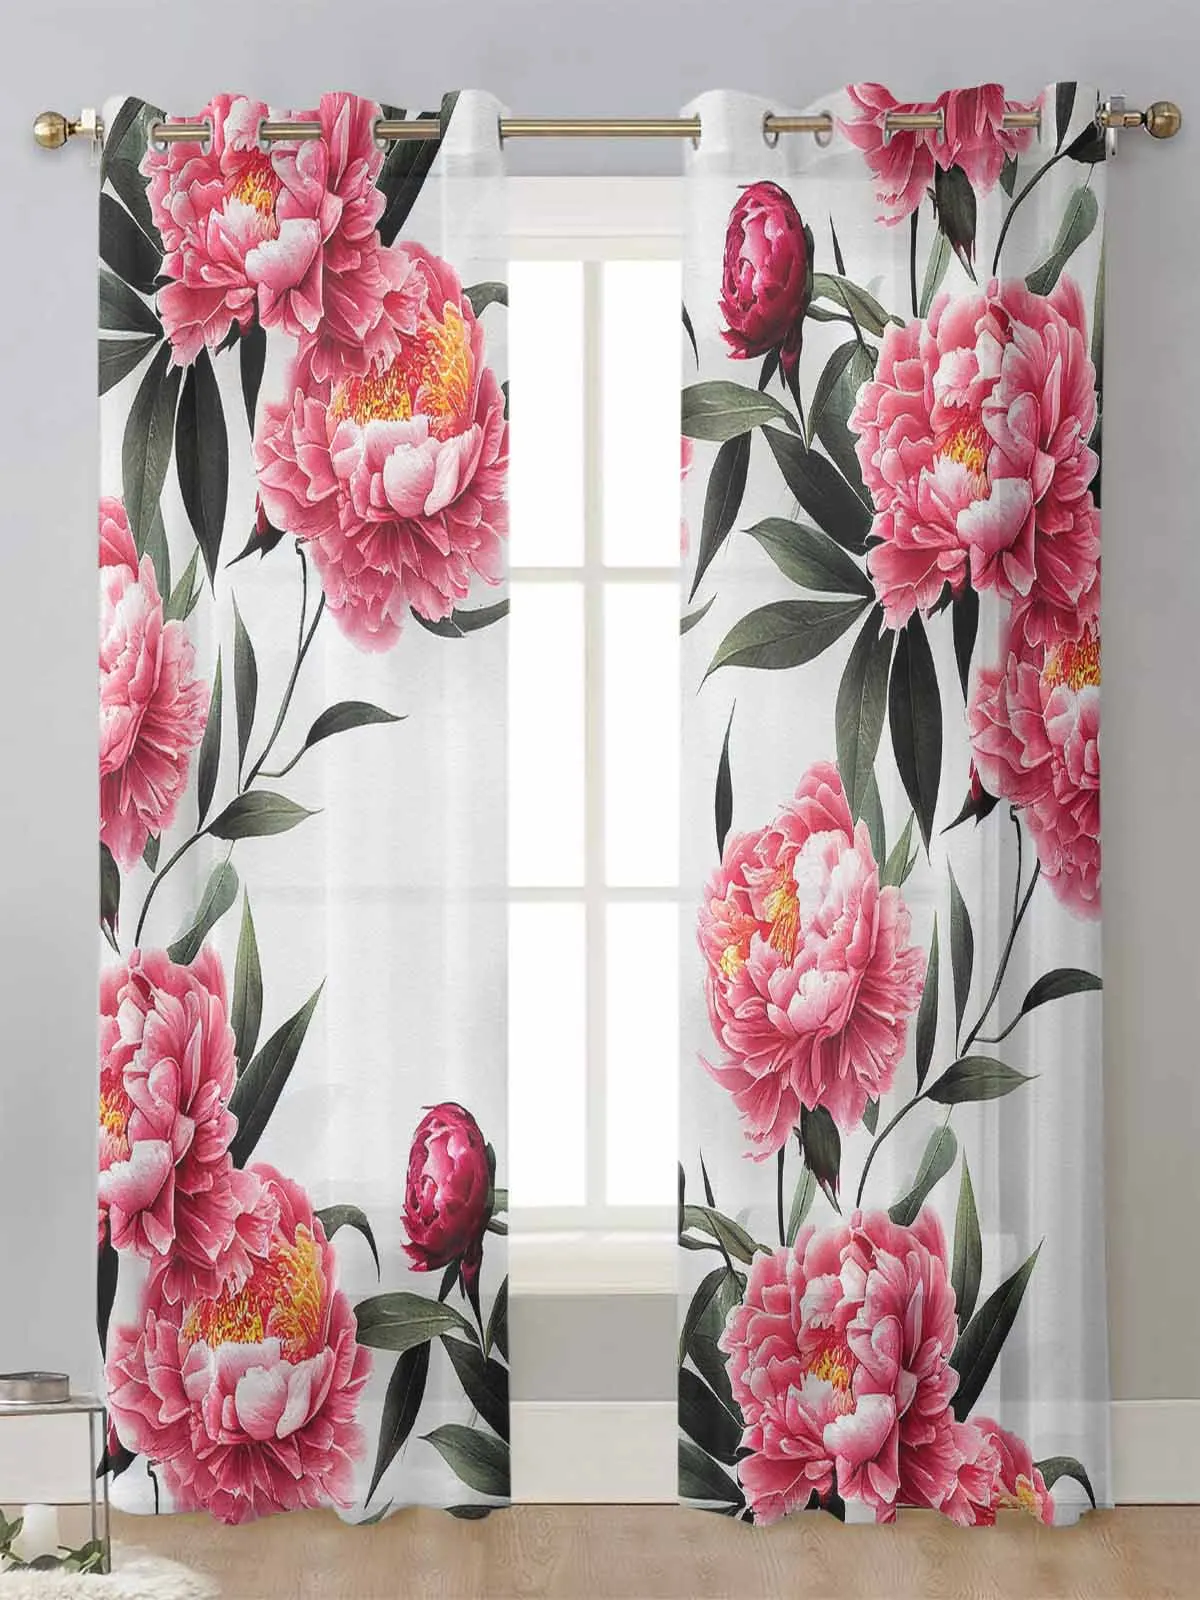 

Peony Flower Ink Painting Sheer Curtains For Living Room Window Transparent Voile Tulle Curtain Cortinas Drapes Home Decor